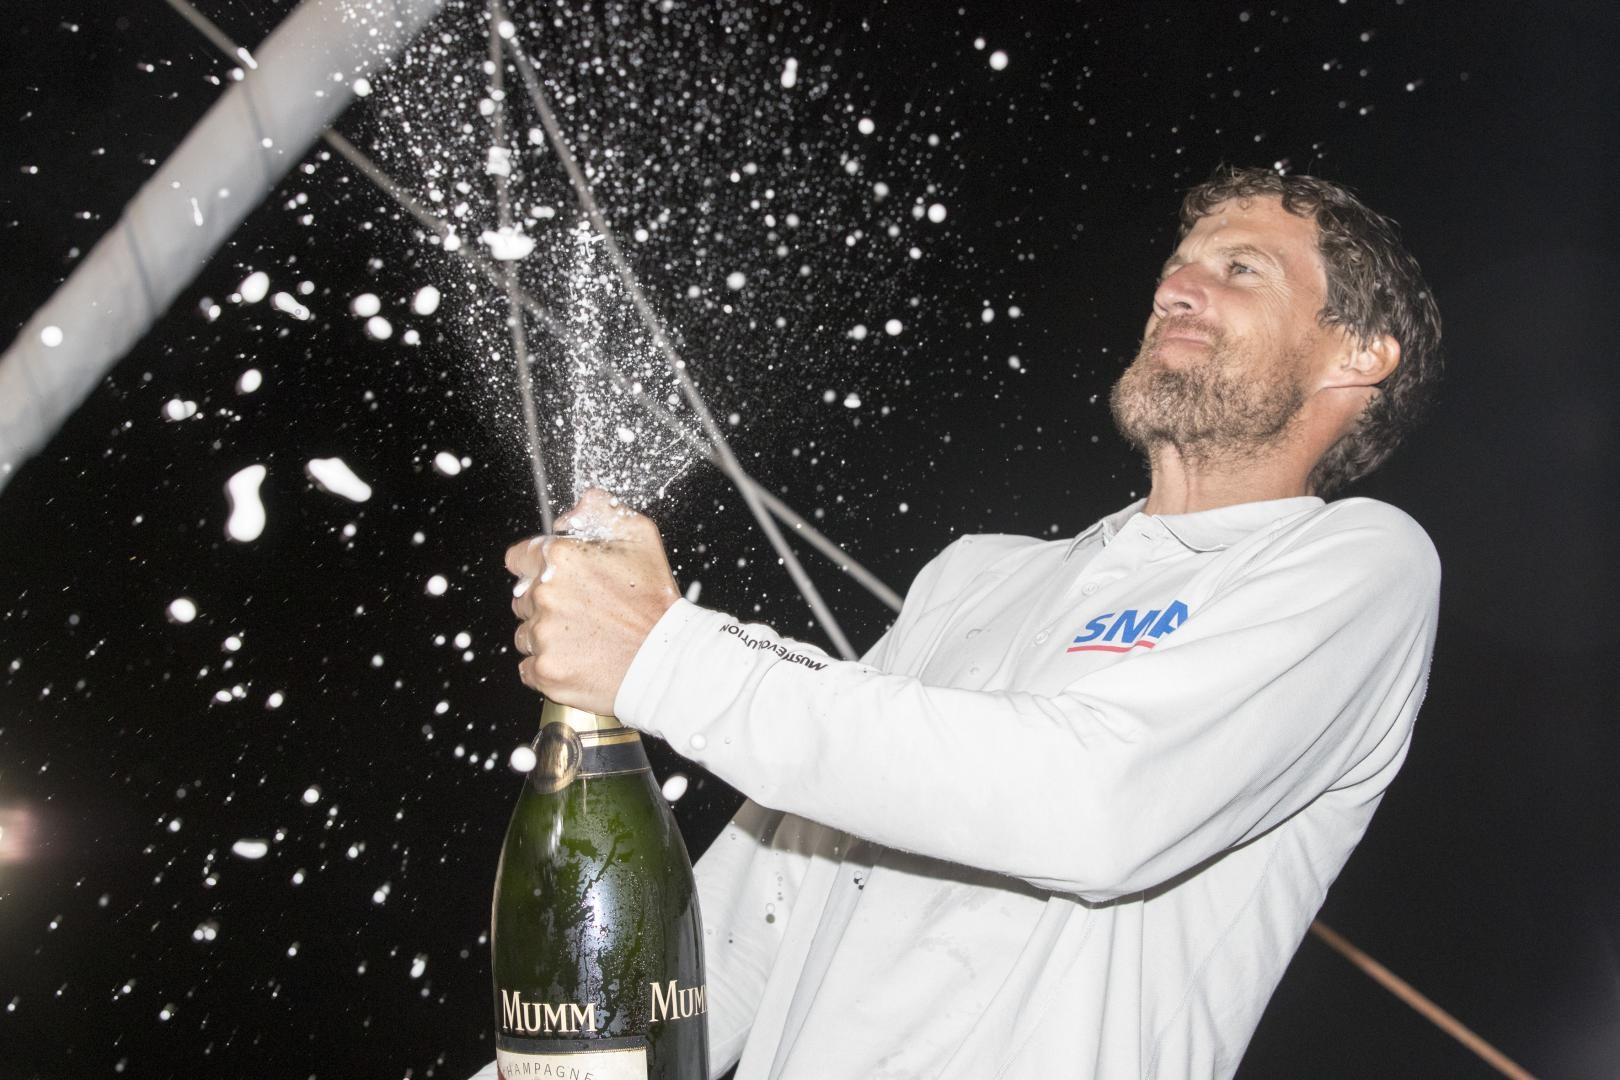 Paul Meilhat (SMA) enjoying his champagne moment after winning the IMOCA class in the Route du Rhum-Destination Guadeloupe.